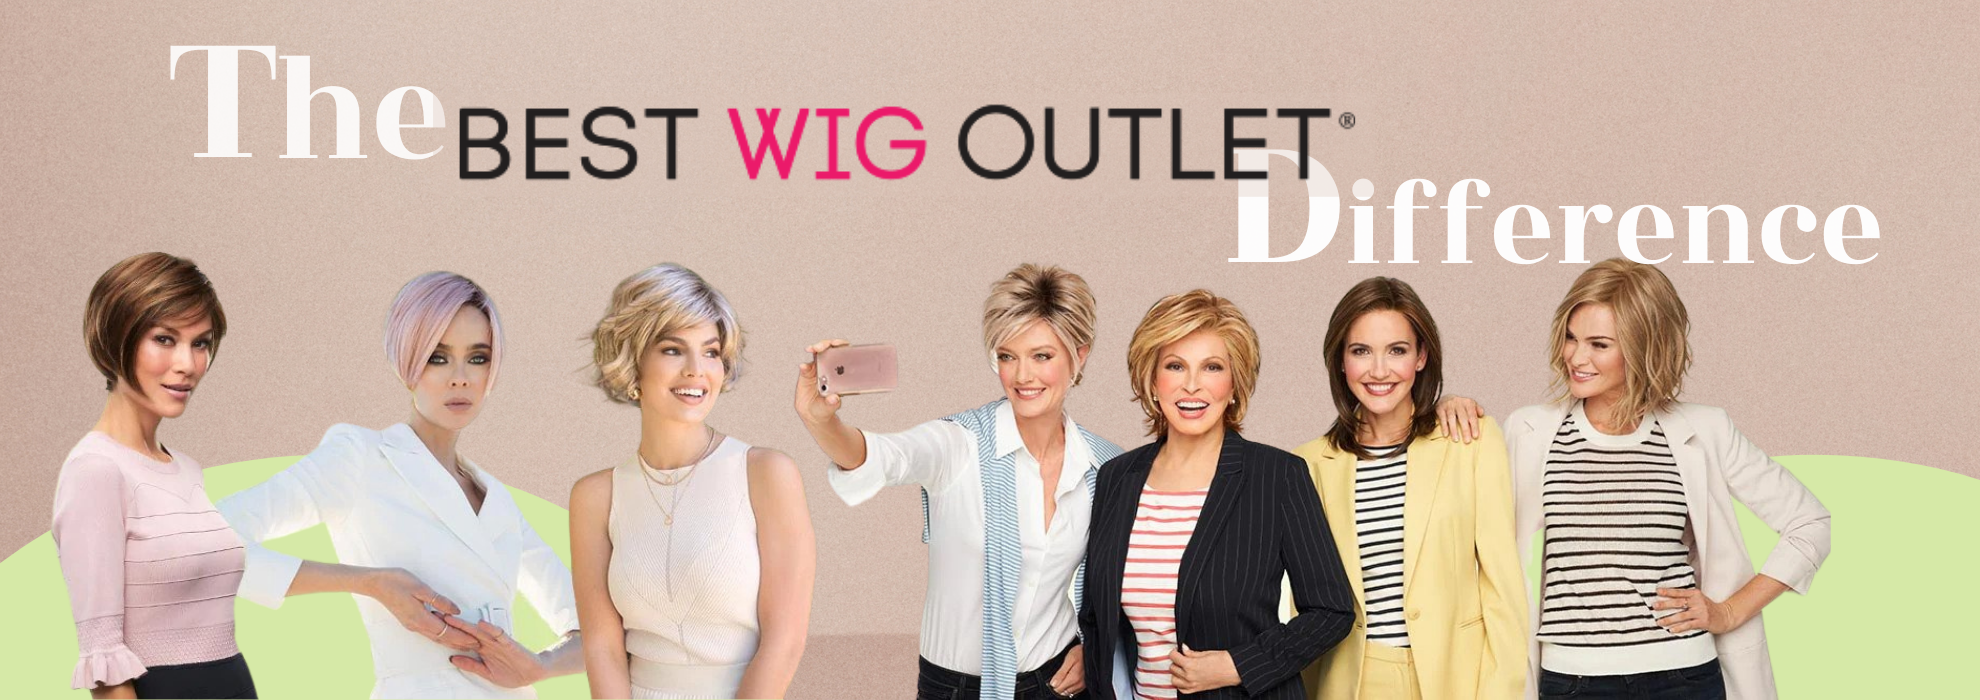 Best Wig Outlet Difference